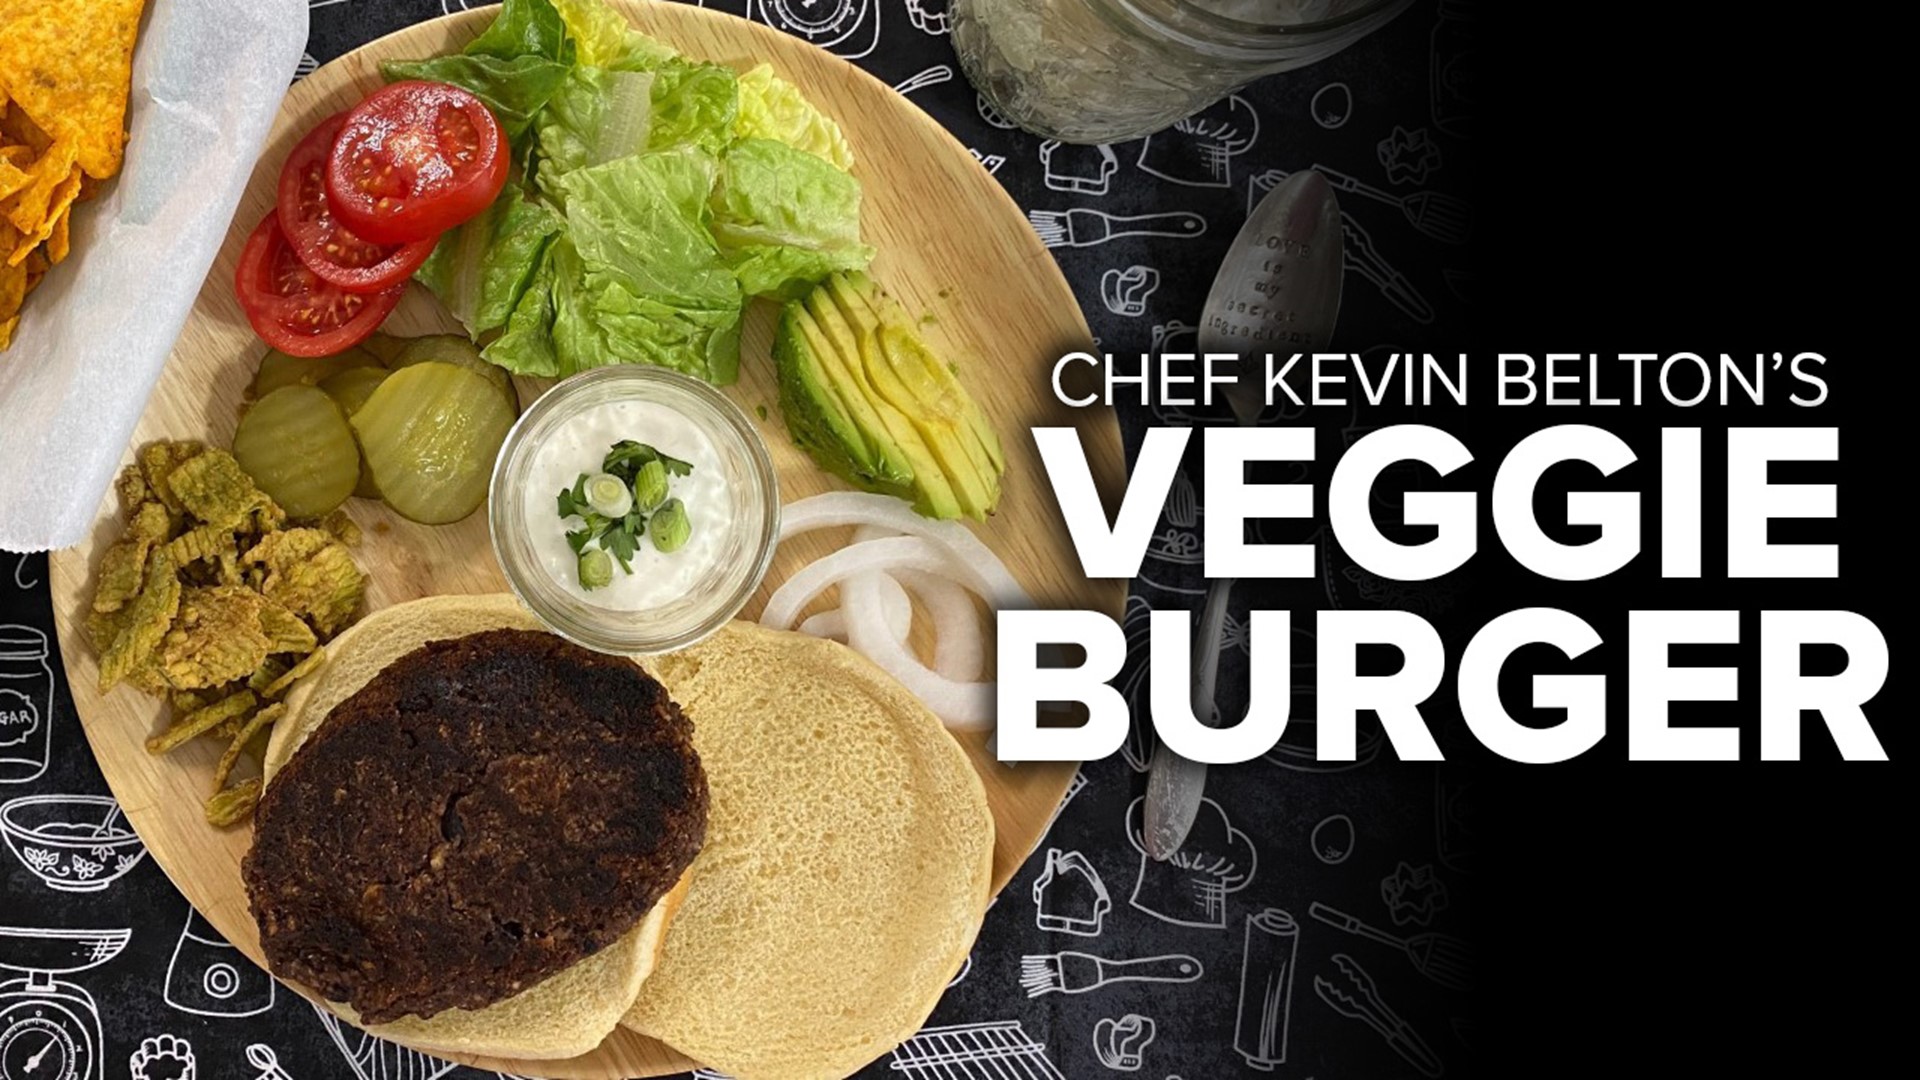 It's almost summer and your vegetarian friends are going to love this veggie burger!